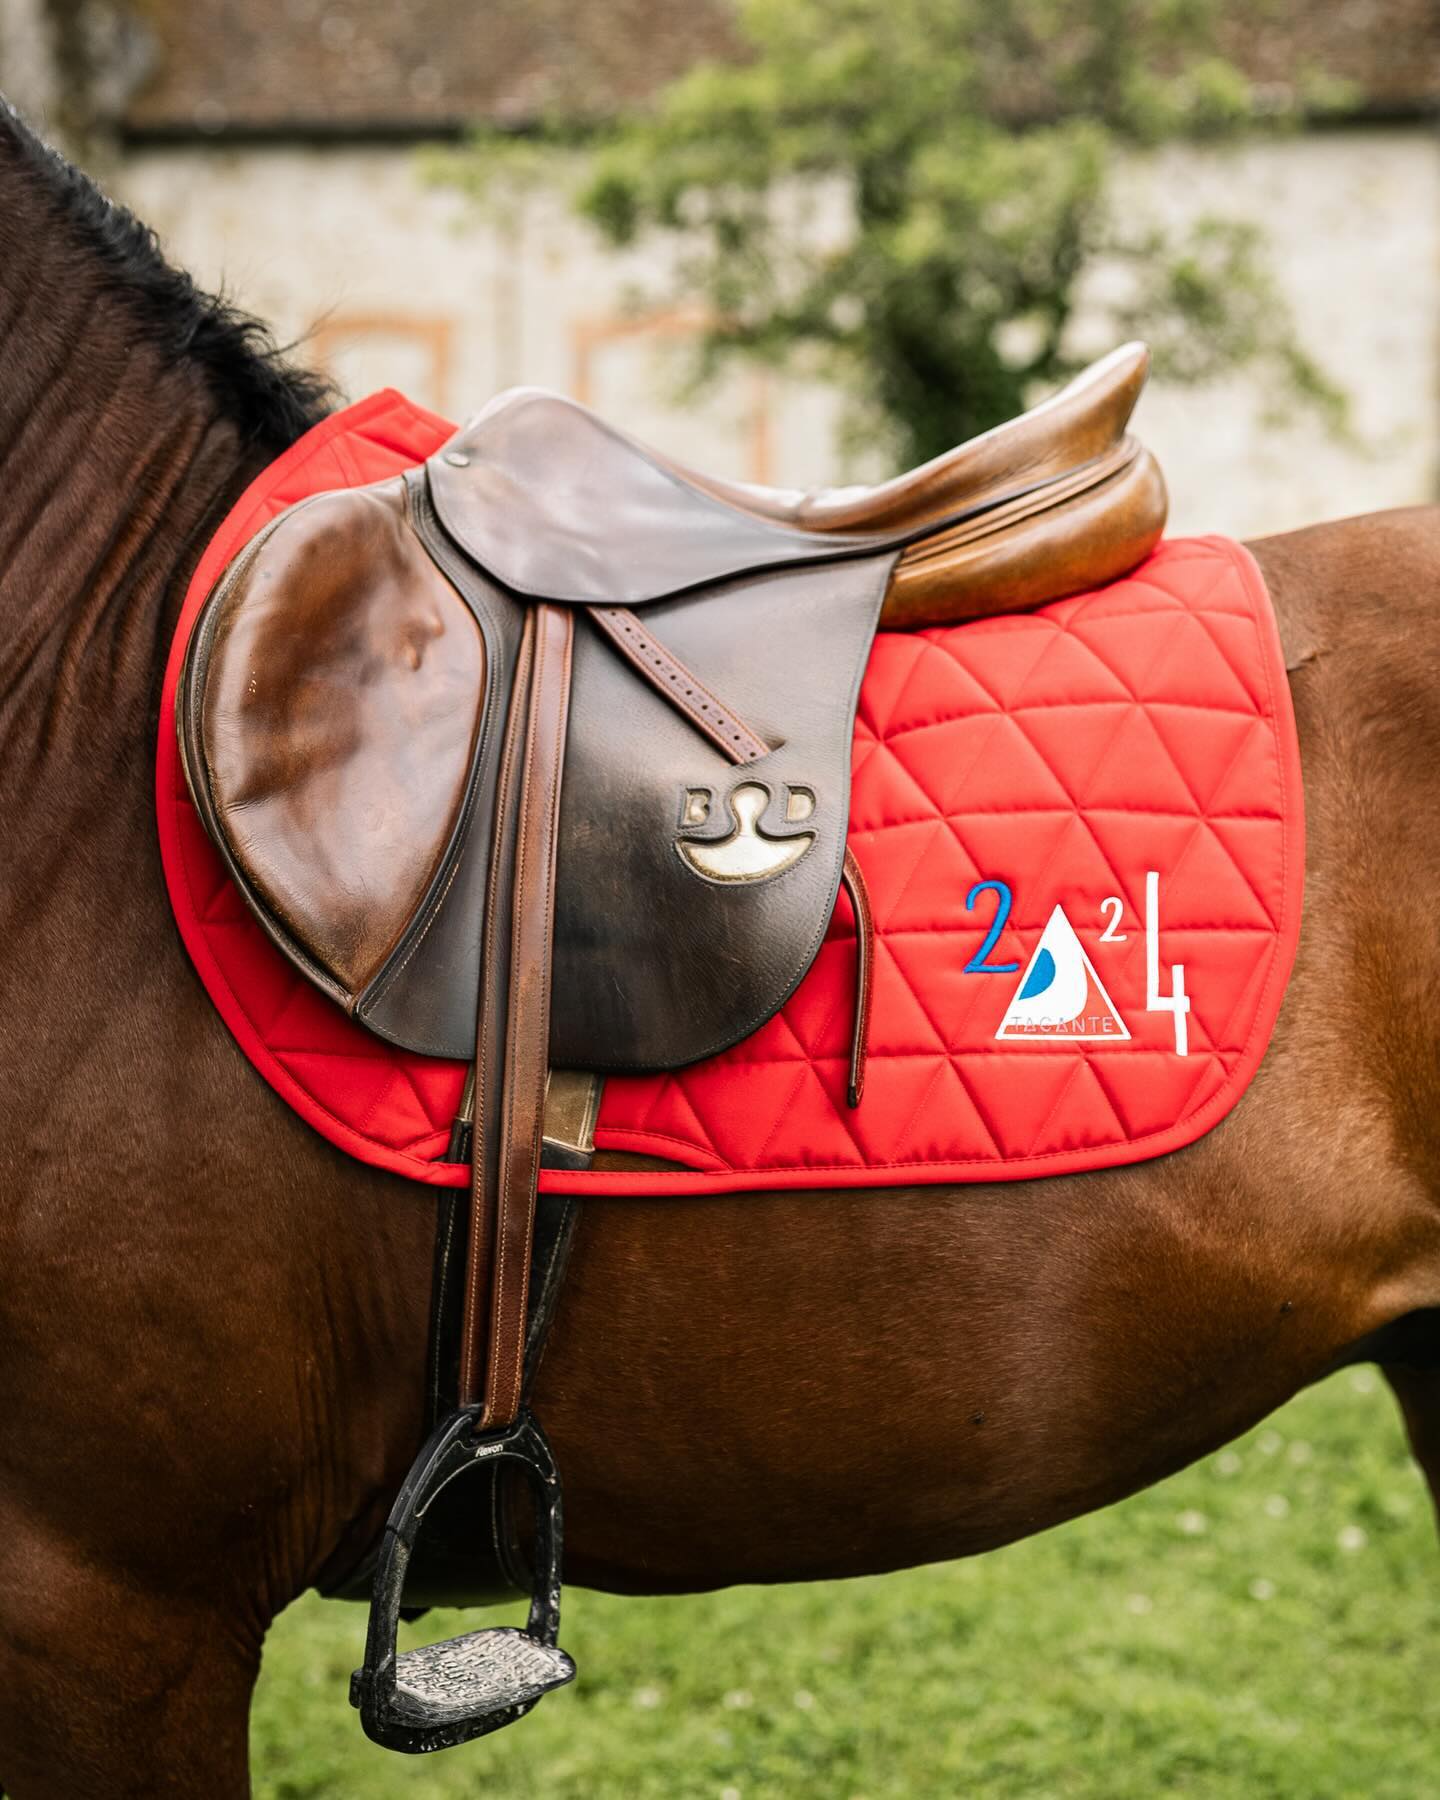 2024… a year to remember 
📸 @hpalprod 
//
#tapisdeselle #madeinfrance #ecoresponsable #sustainable #saddlepad #rideto2024 #earnet #bonnetcheval #editionlimitee #equitation #equestrianstyle #equestrianlife